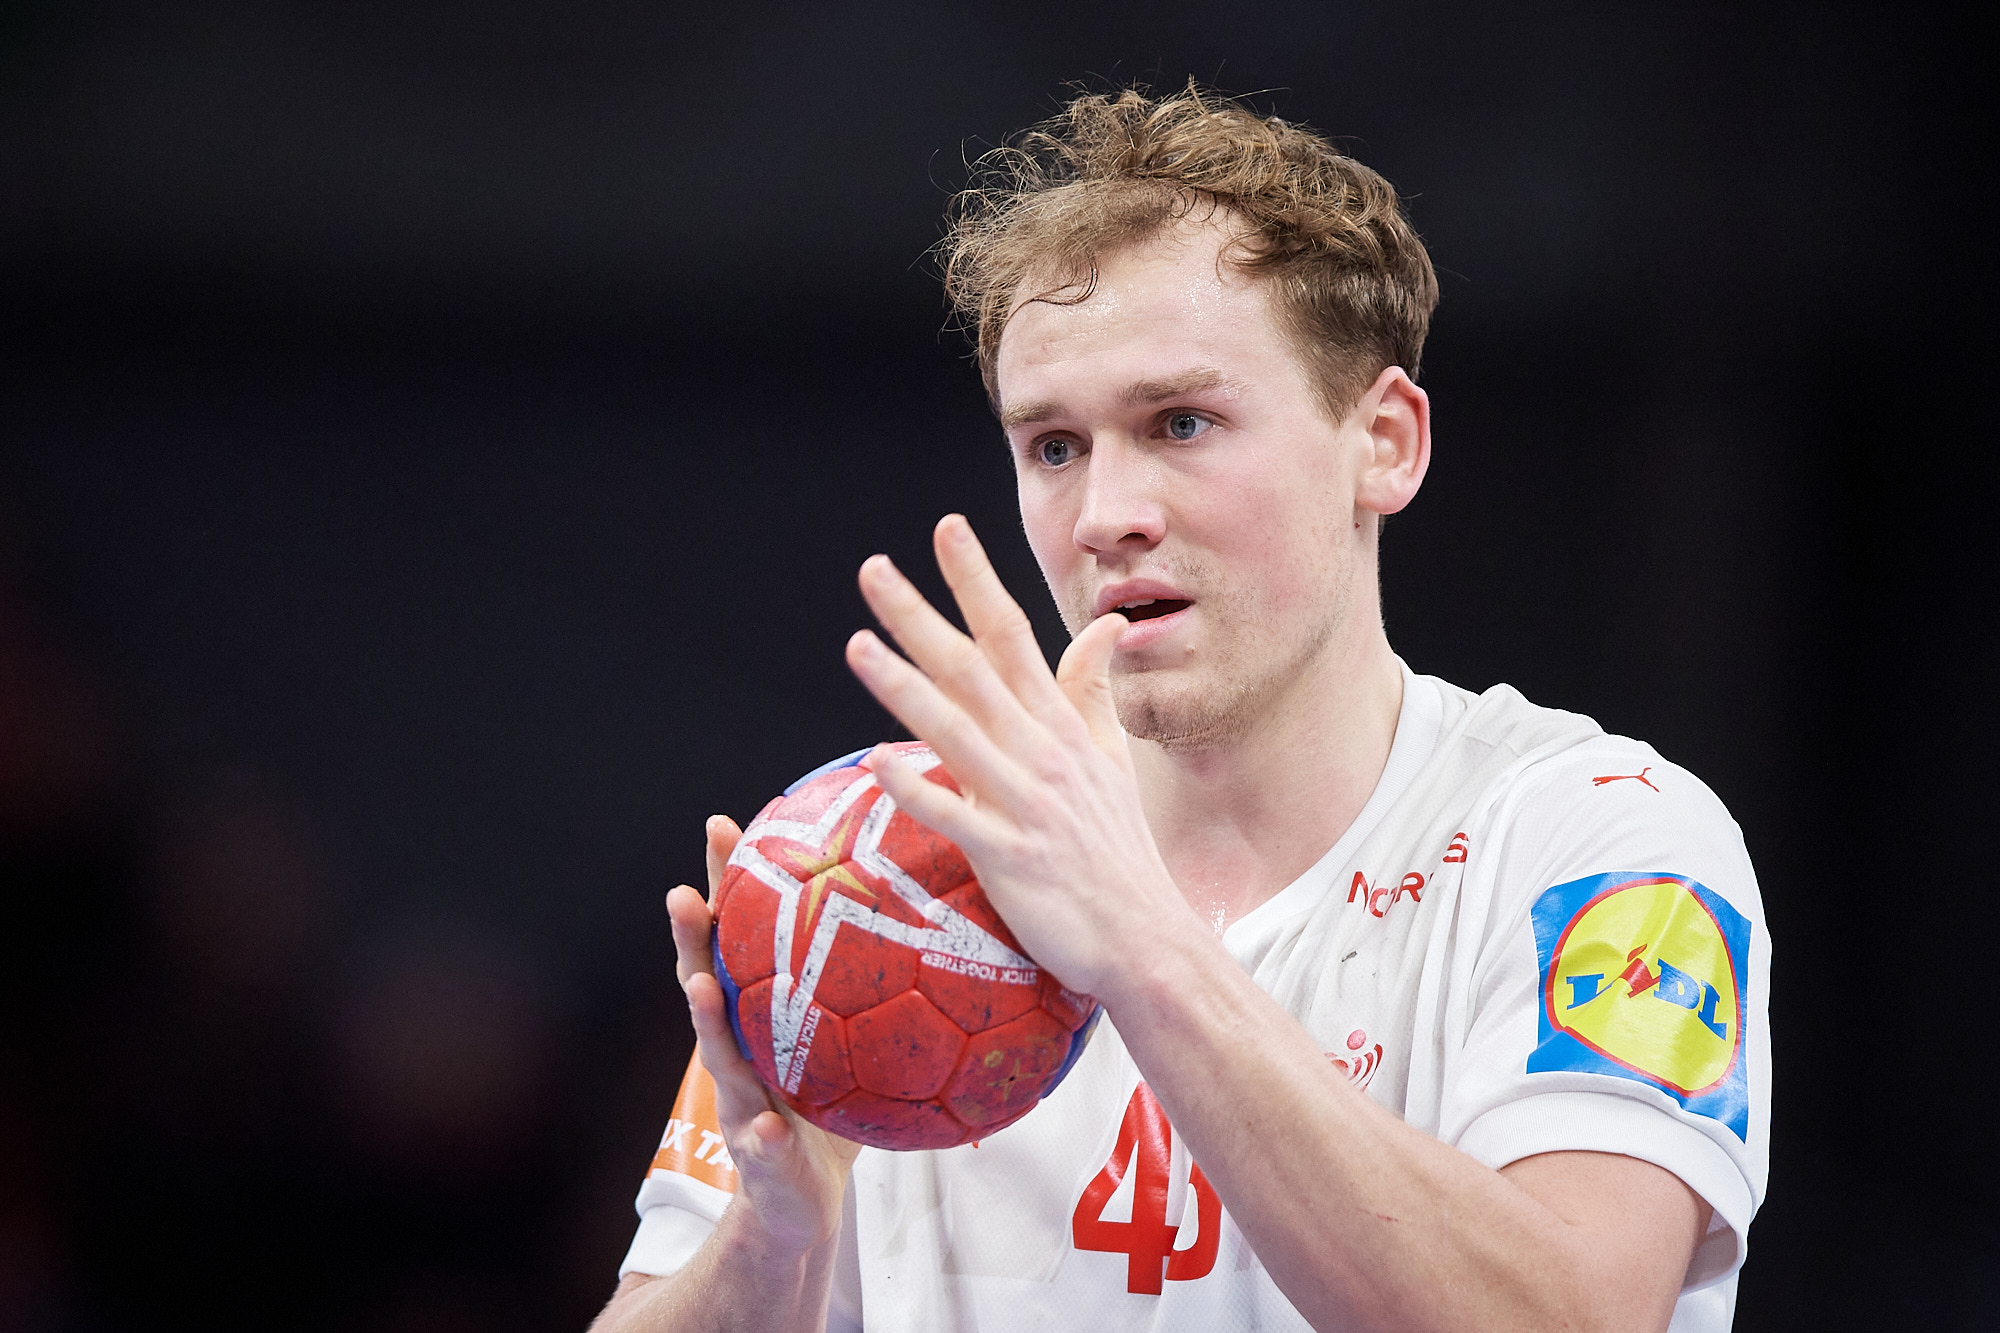 IHF World Championship 2023 Power Ranking: Denmark, France and Sweden for  the title!